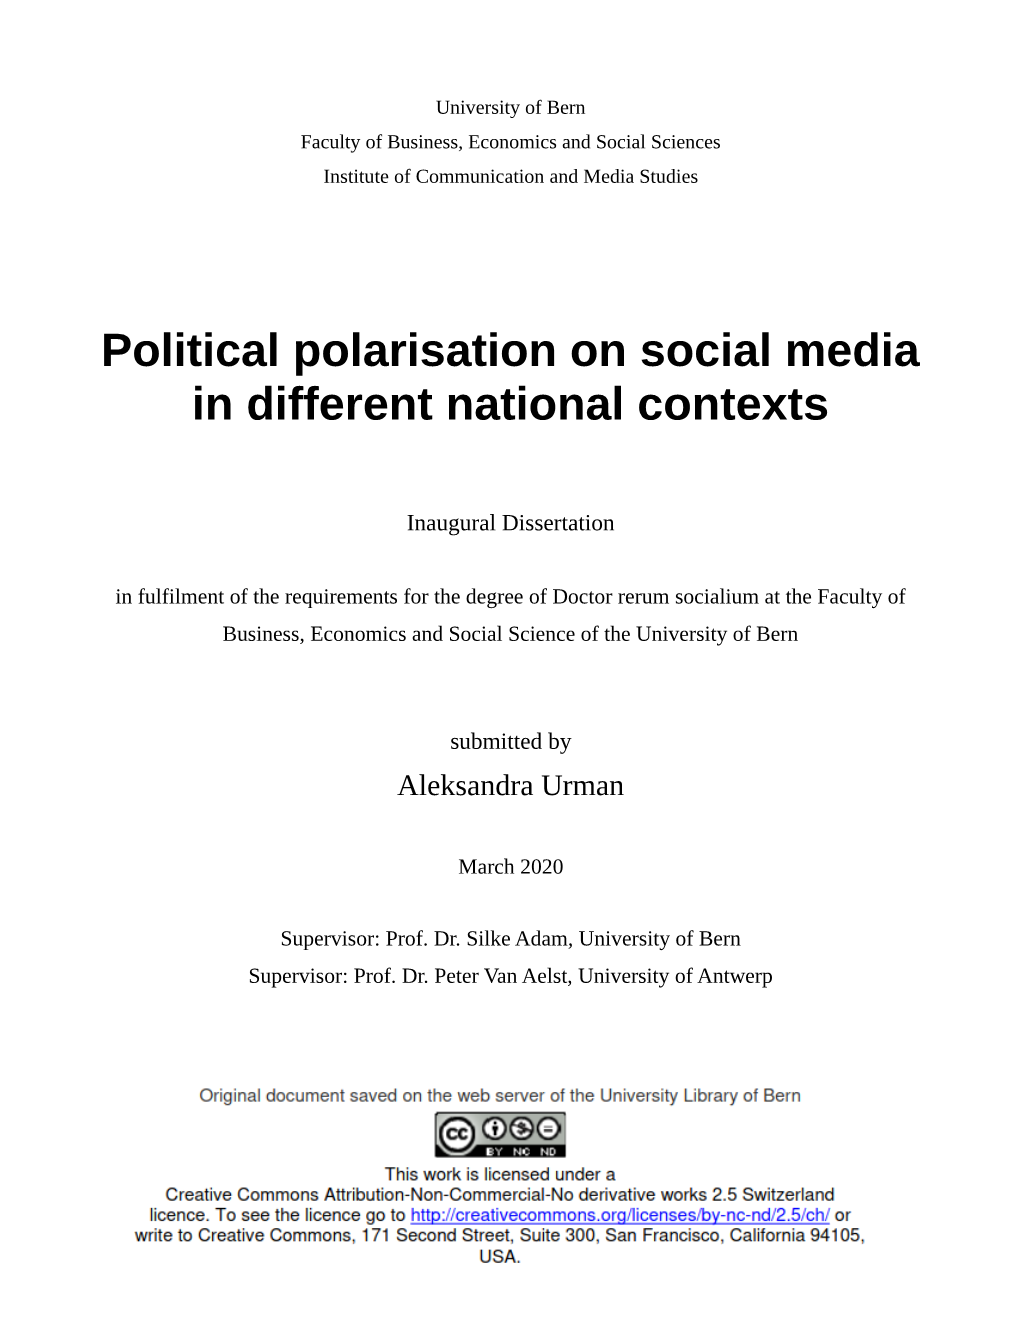 Political Polarisation on Social Media in Different National Contexts